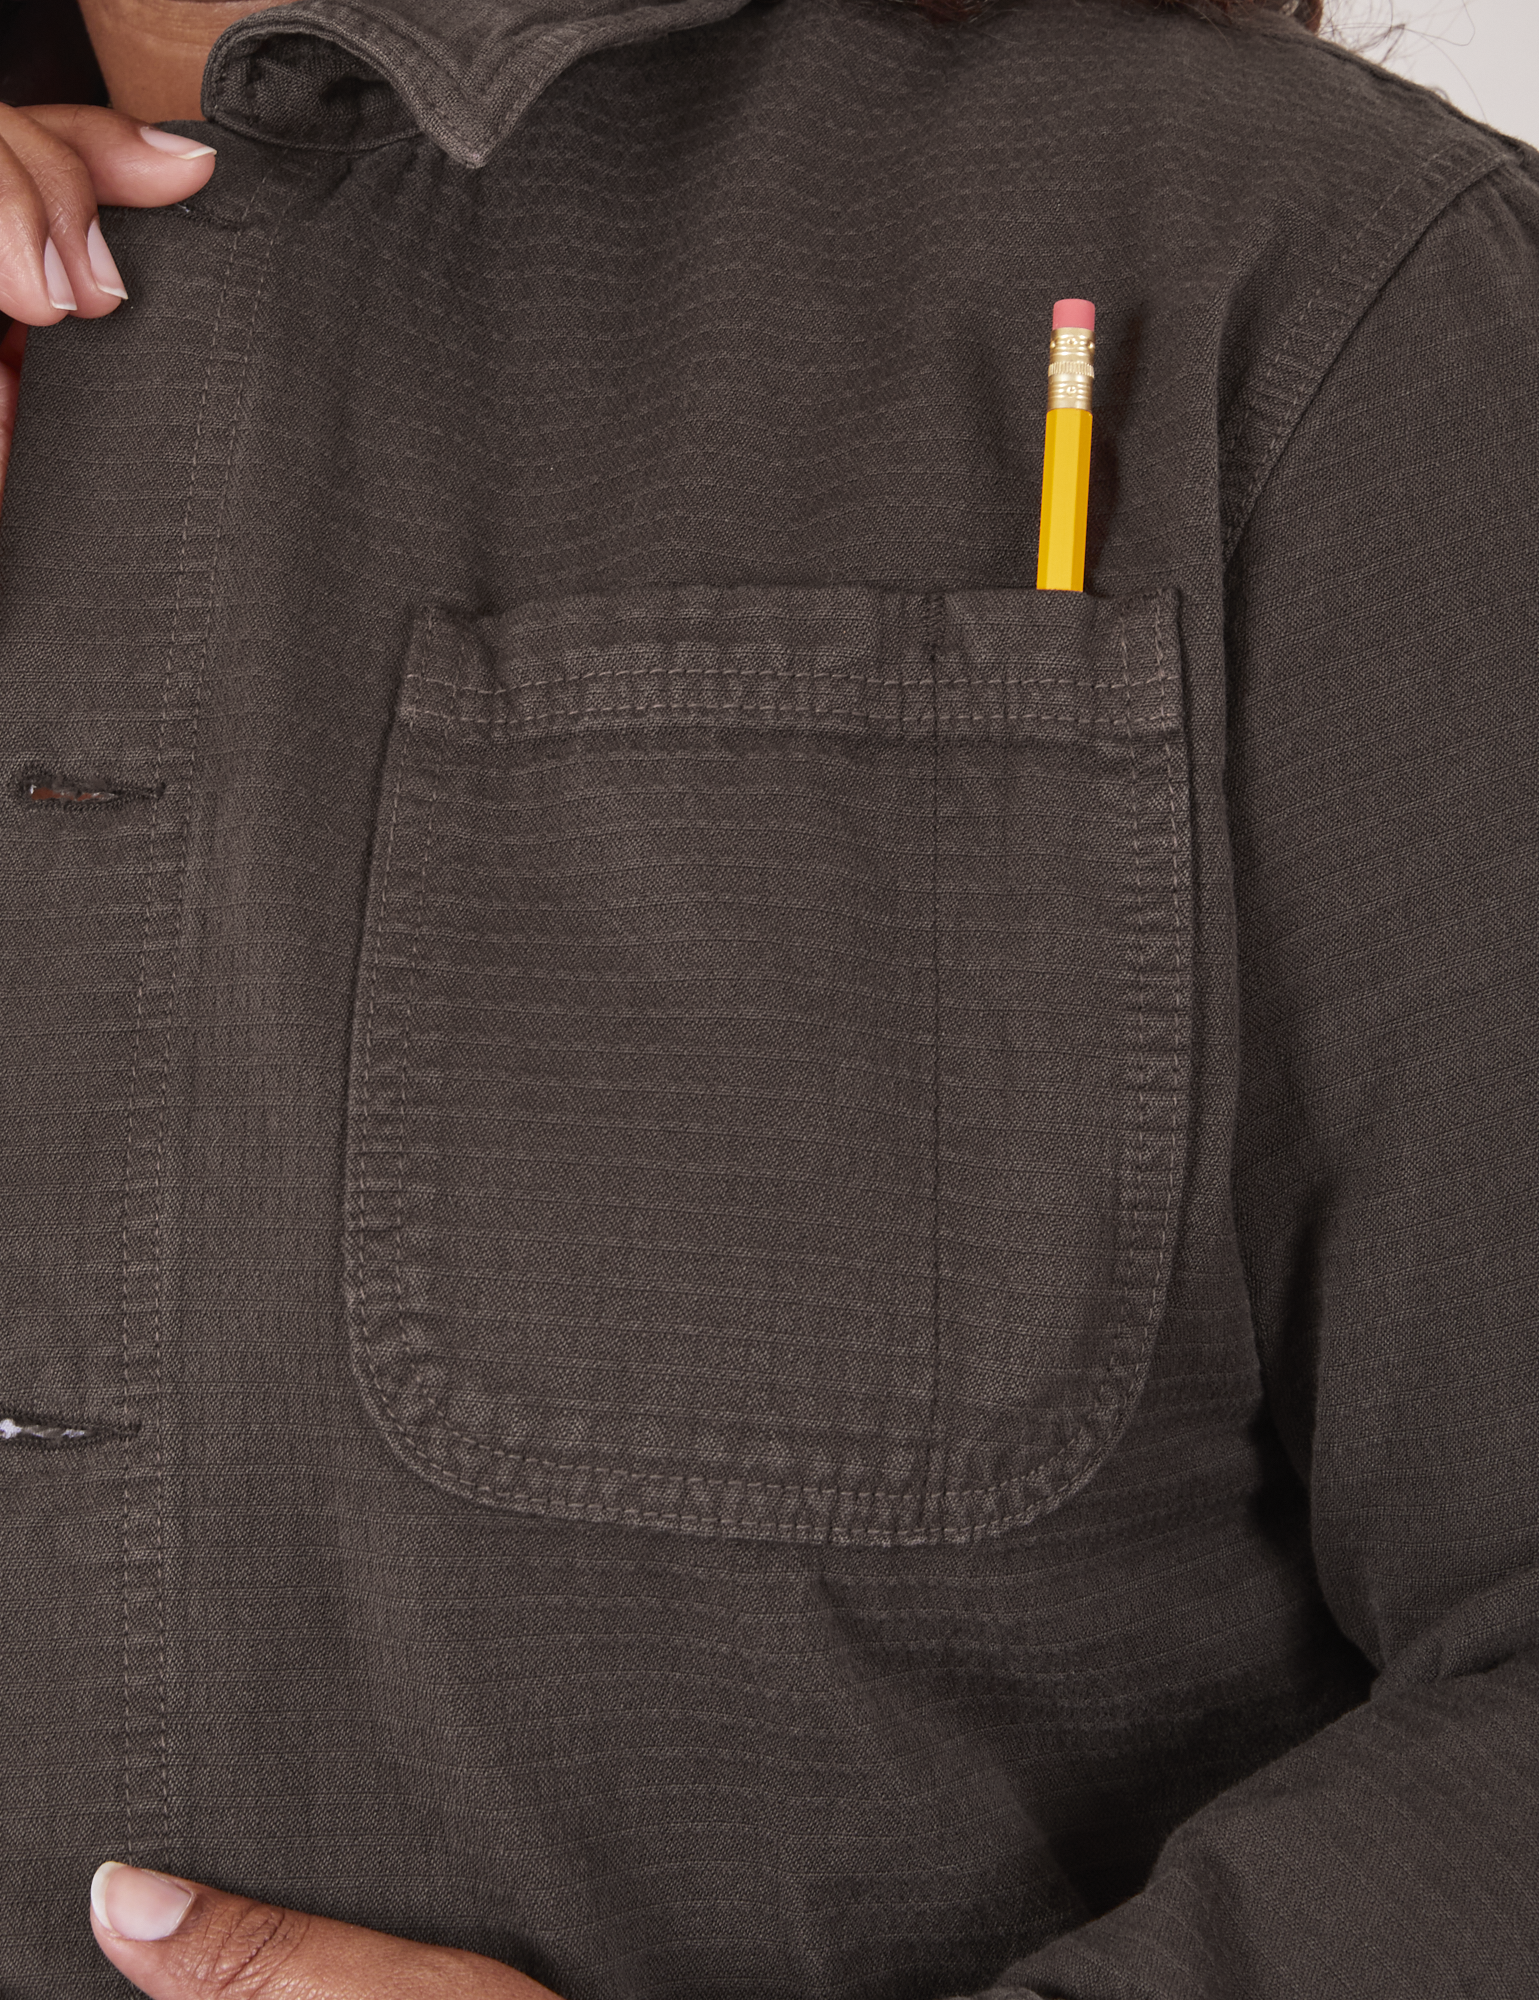 Field Coat in Espresso Brown font pocket close up with pencil in the pen pocket slot